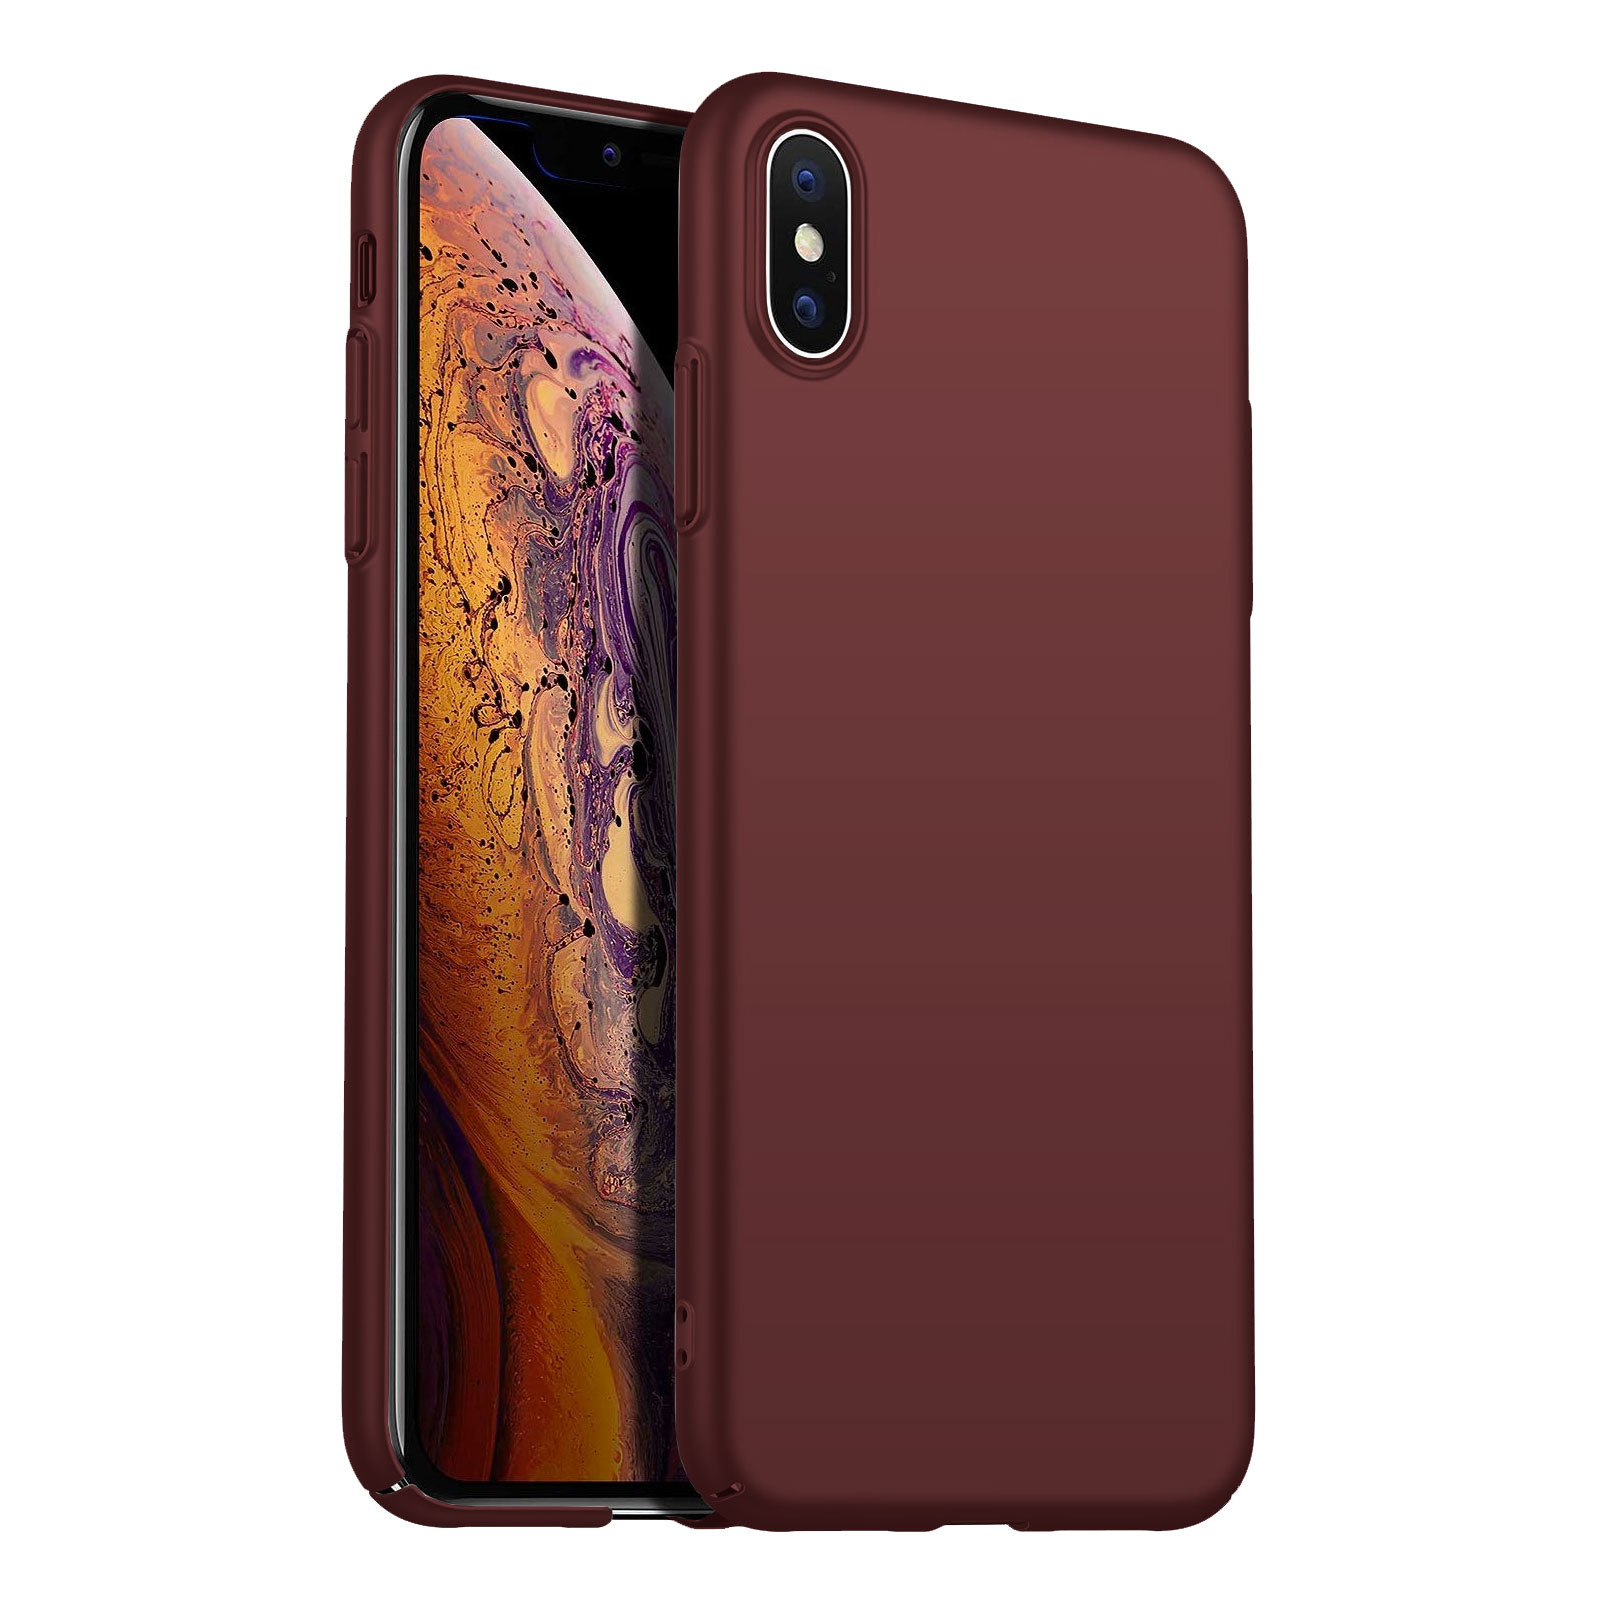 Back Case Cover iPhone X / Xs Hoesje Burgundy